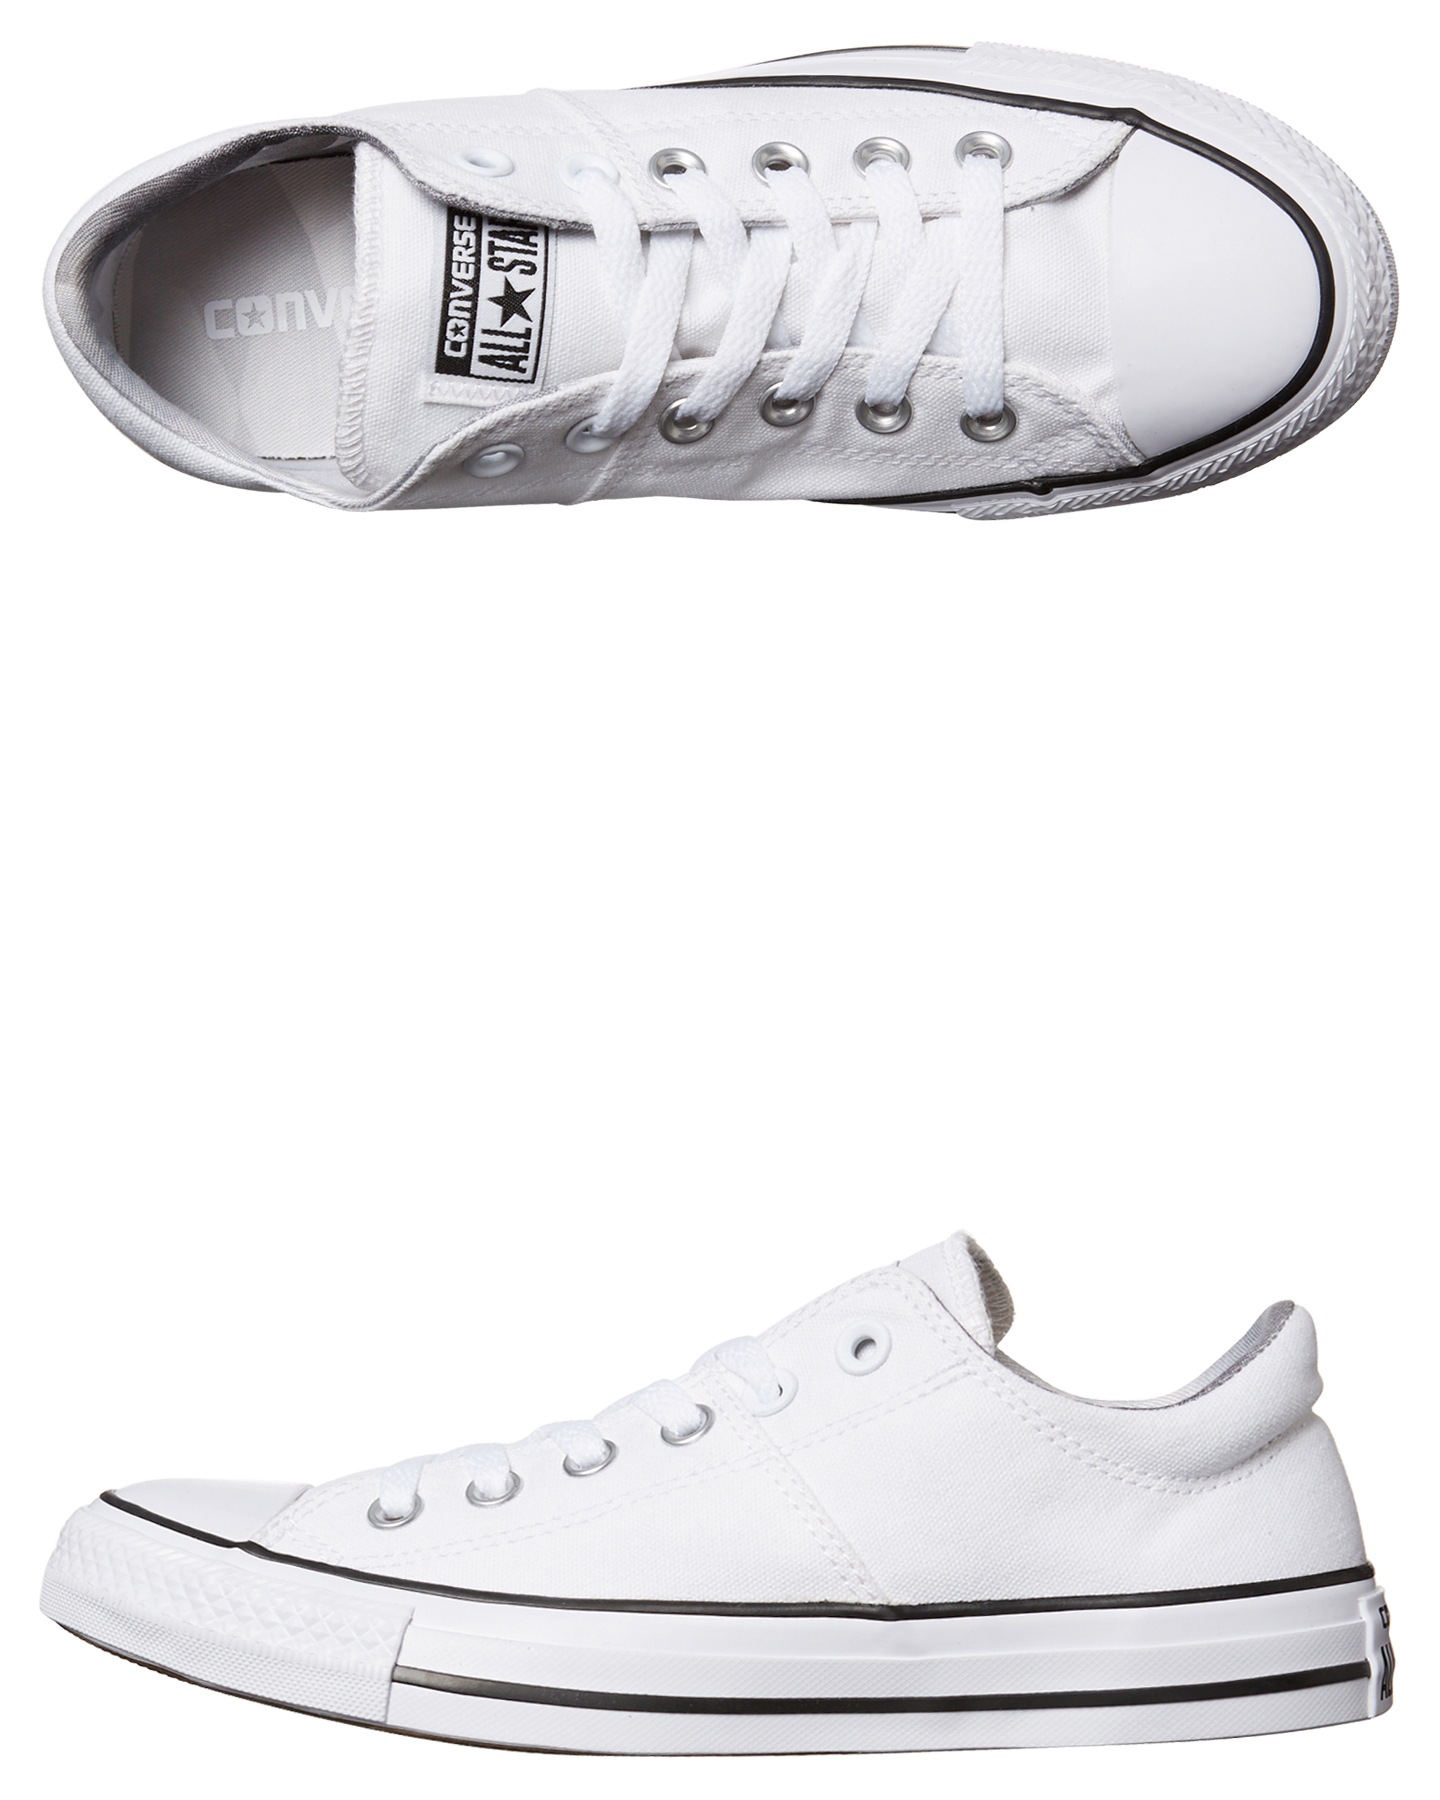 converse chuck taylor all star madison canvas shoes